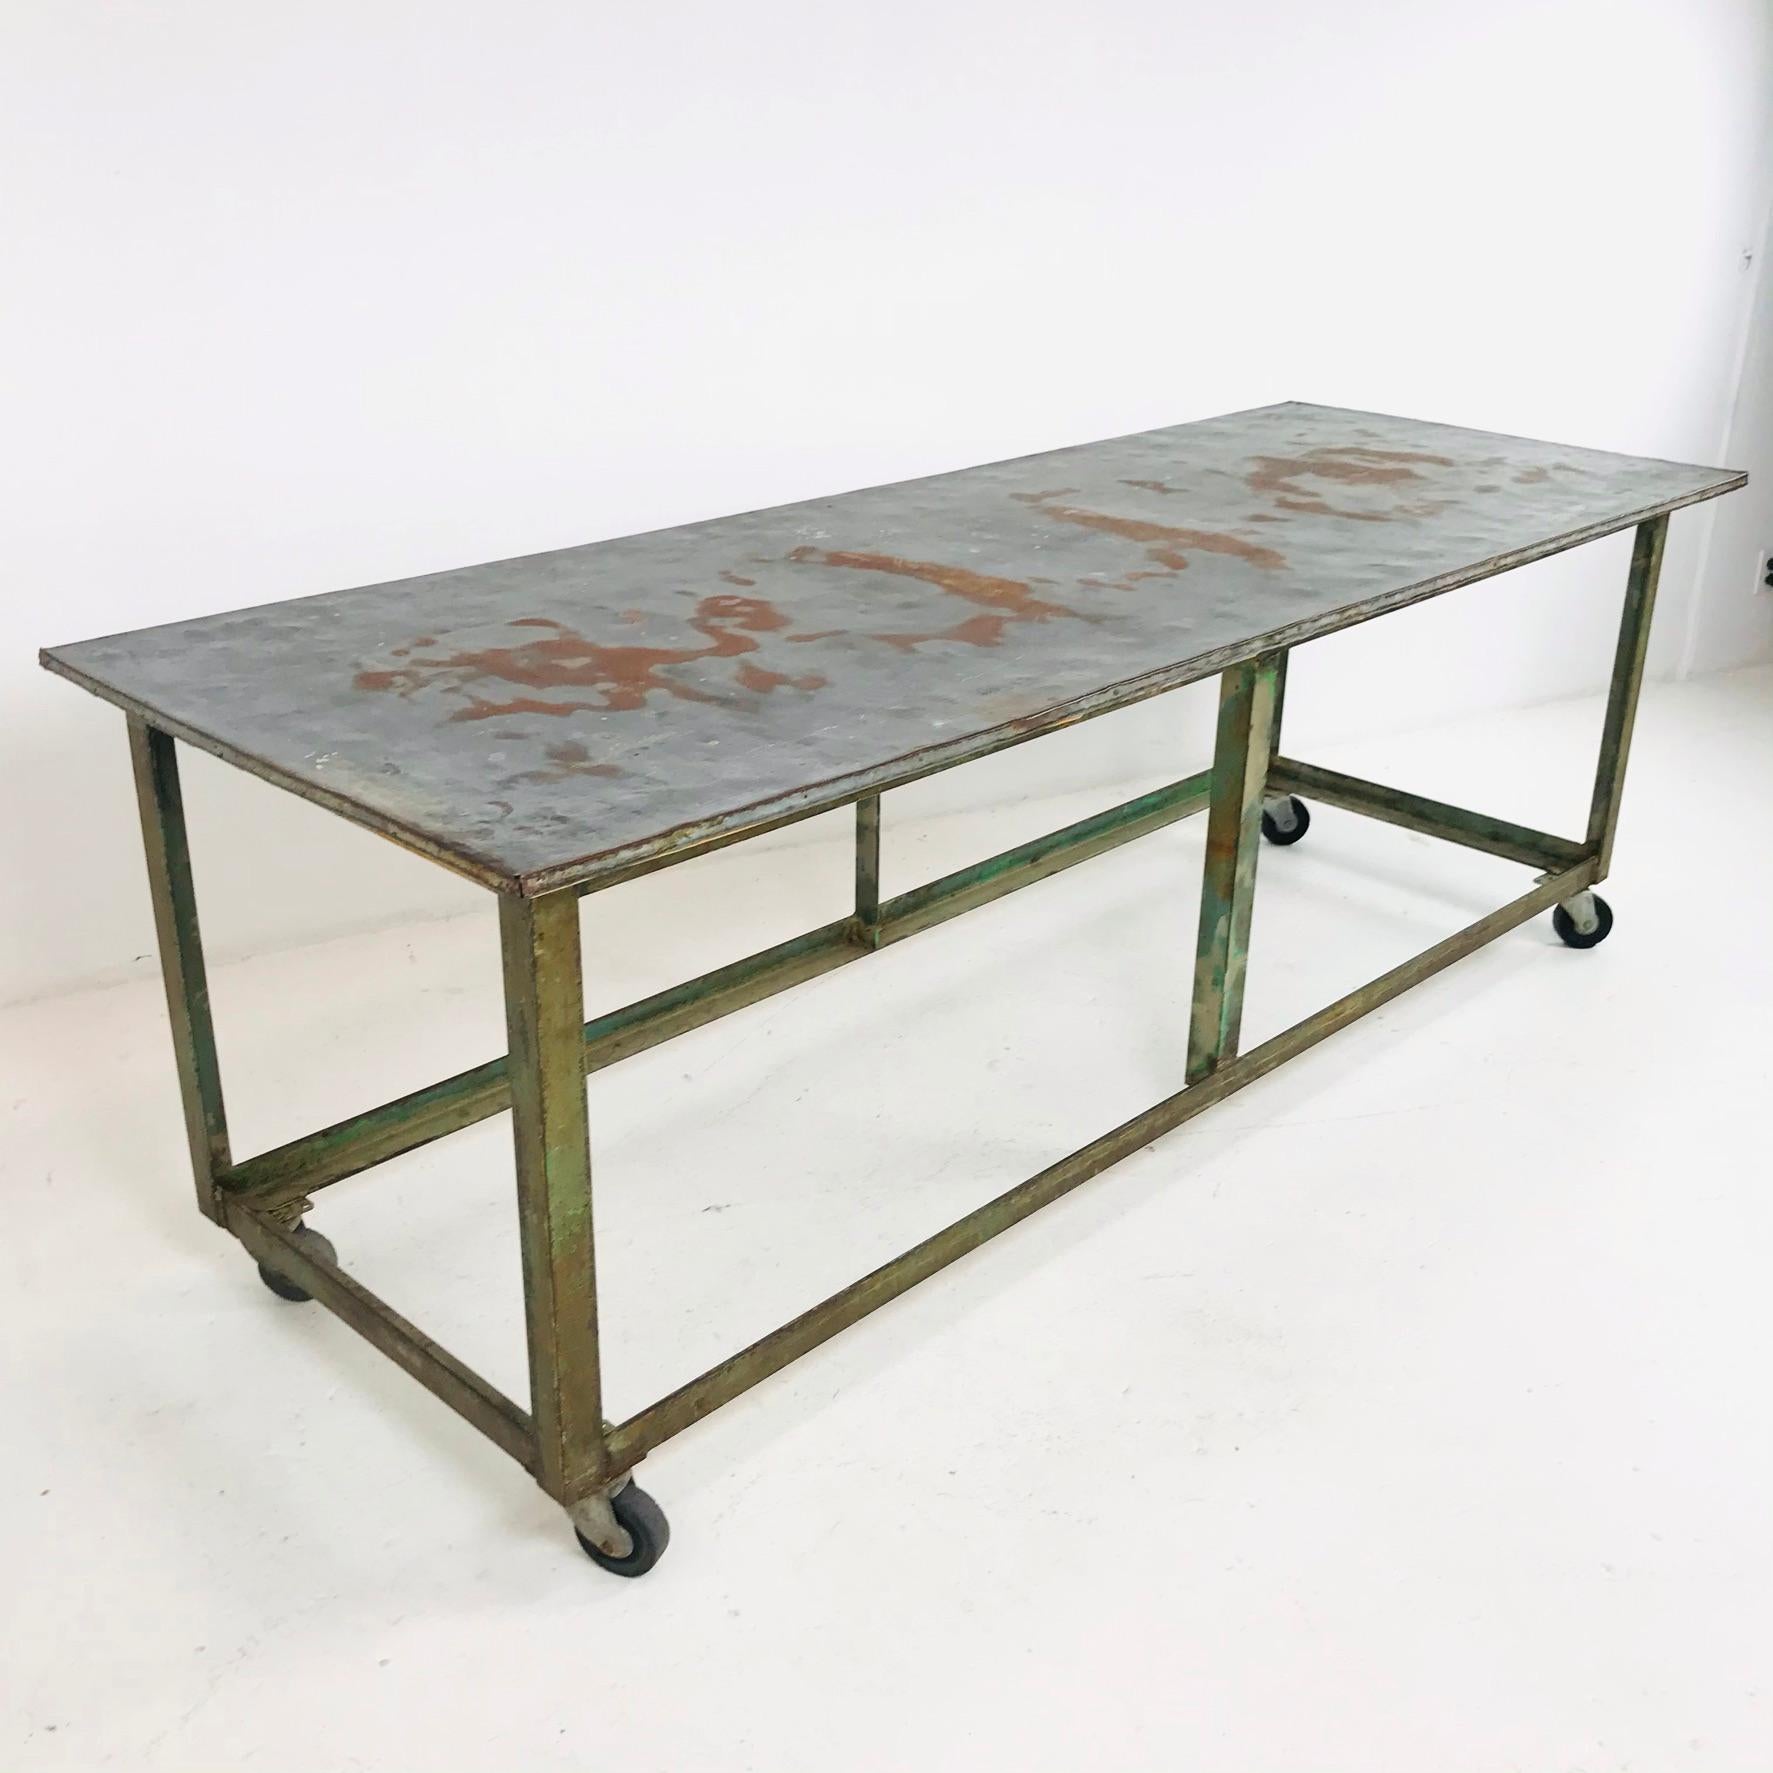 Robust, vintage American industrial four-legged display/work table on casters.